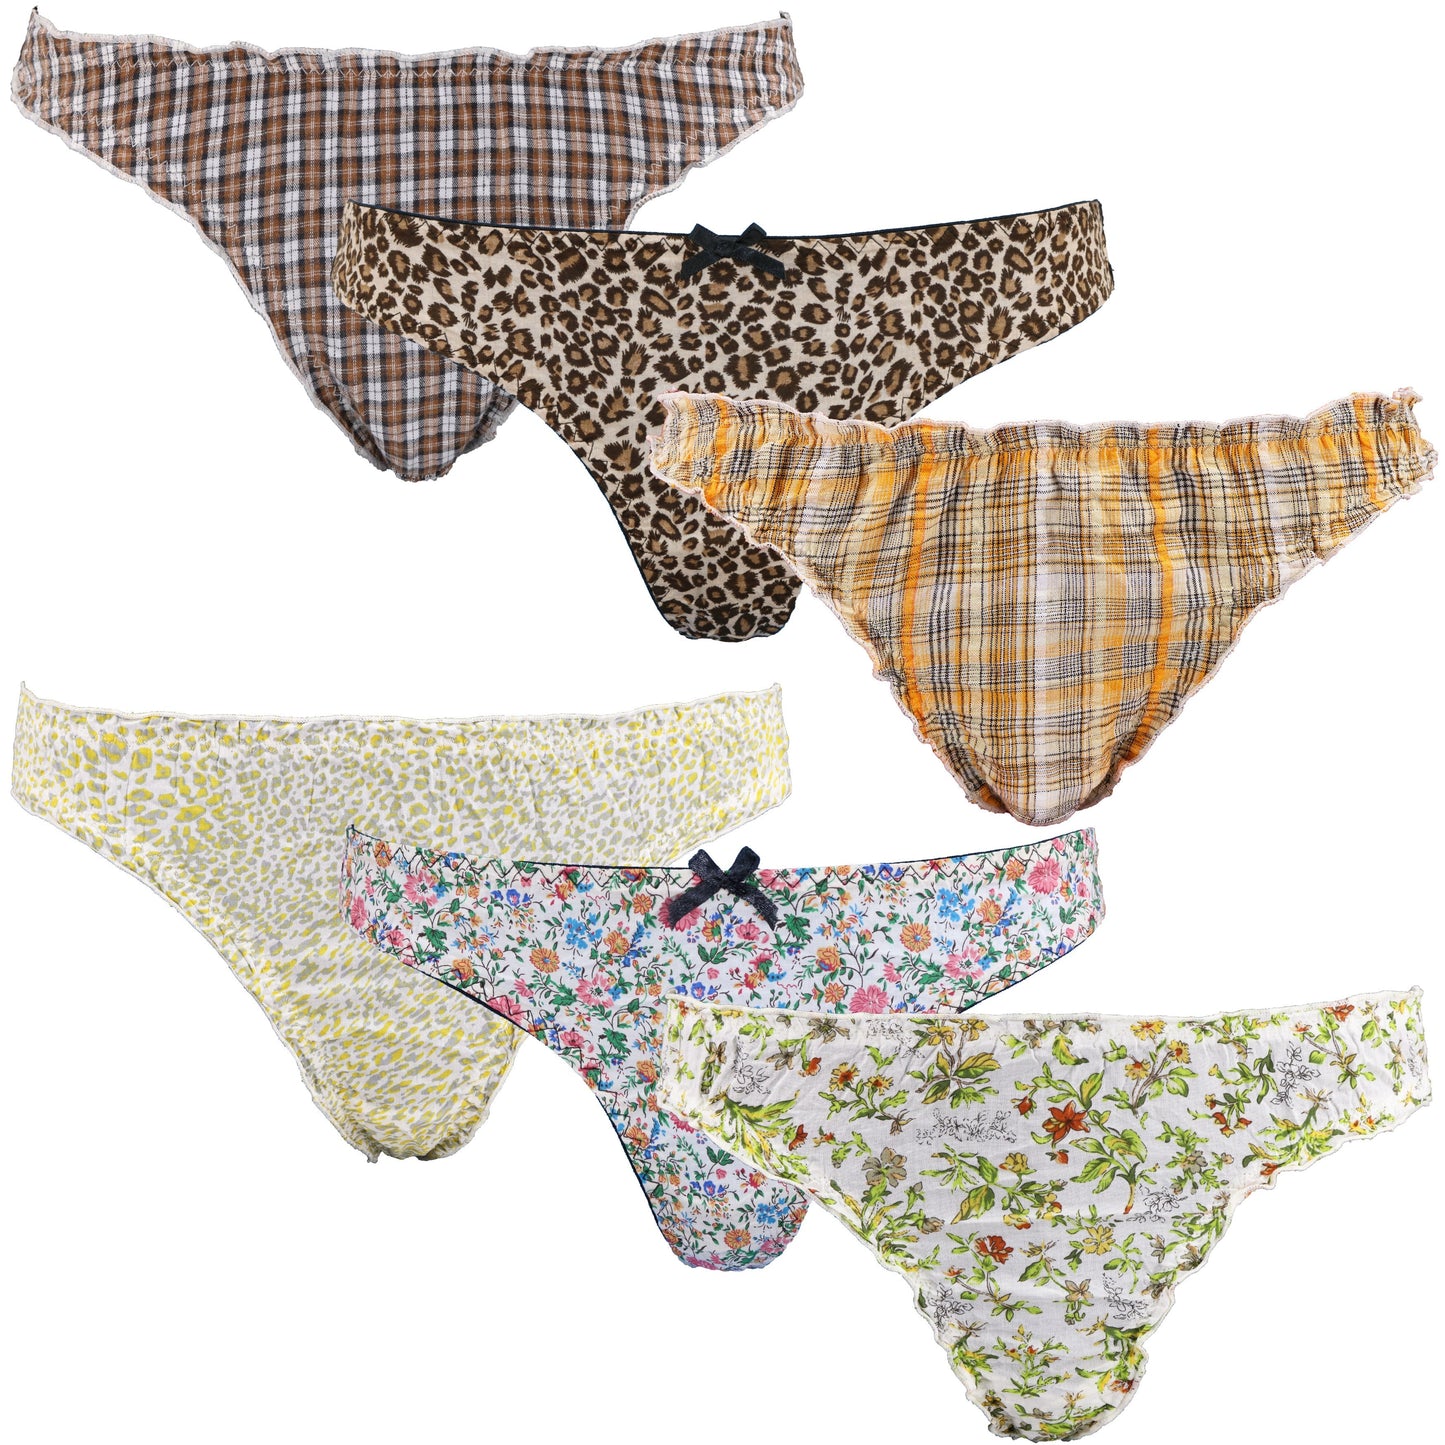 Women's Sexy Assorted Low Rise Thongs V-G Strings Panties